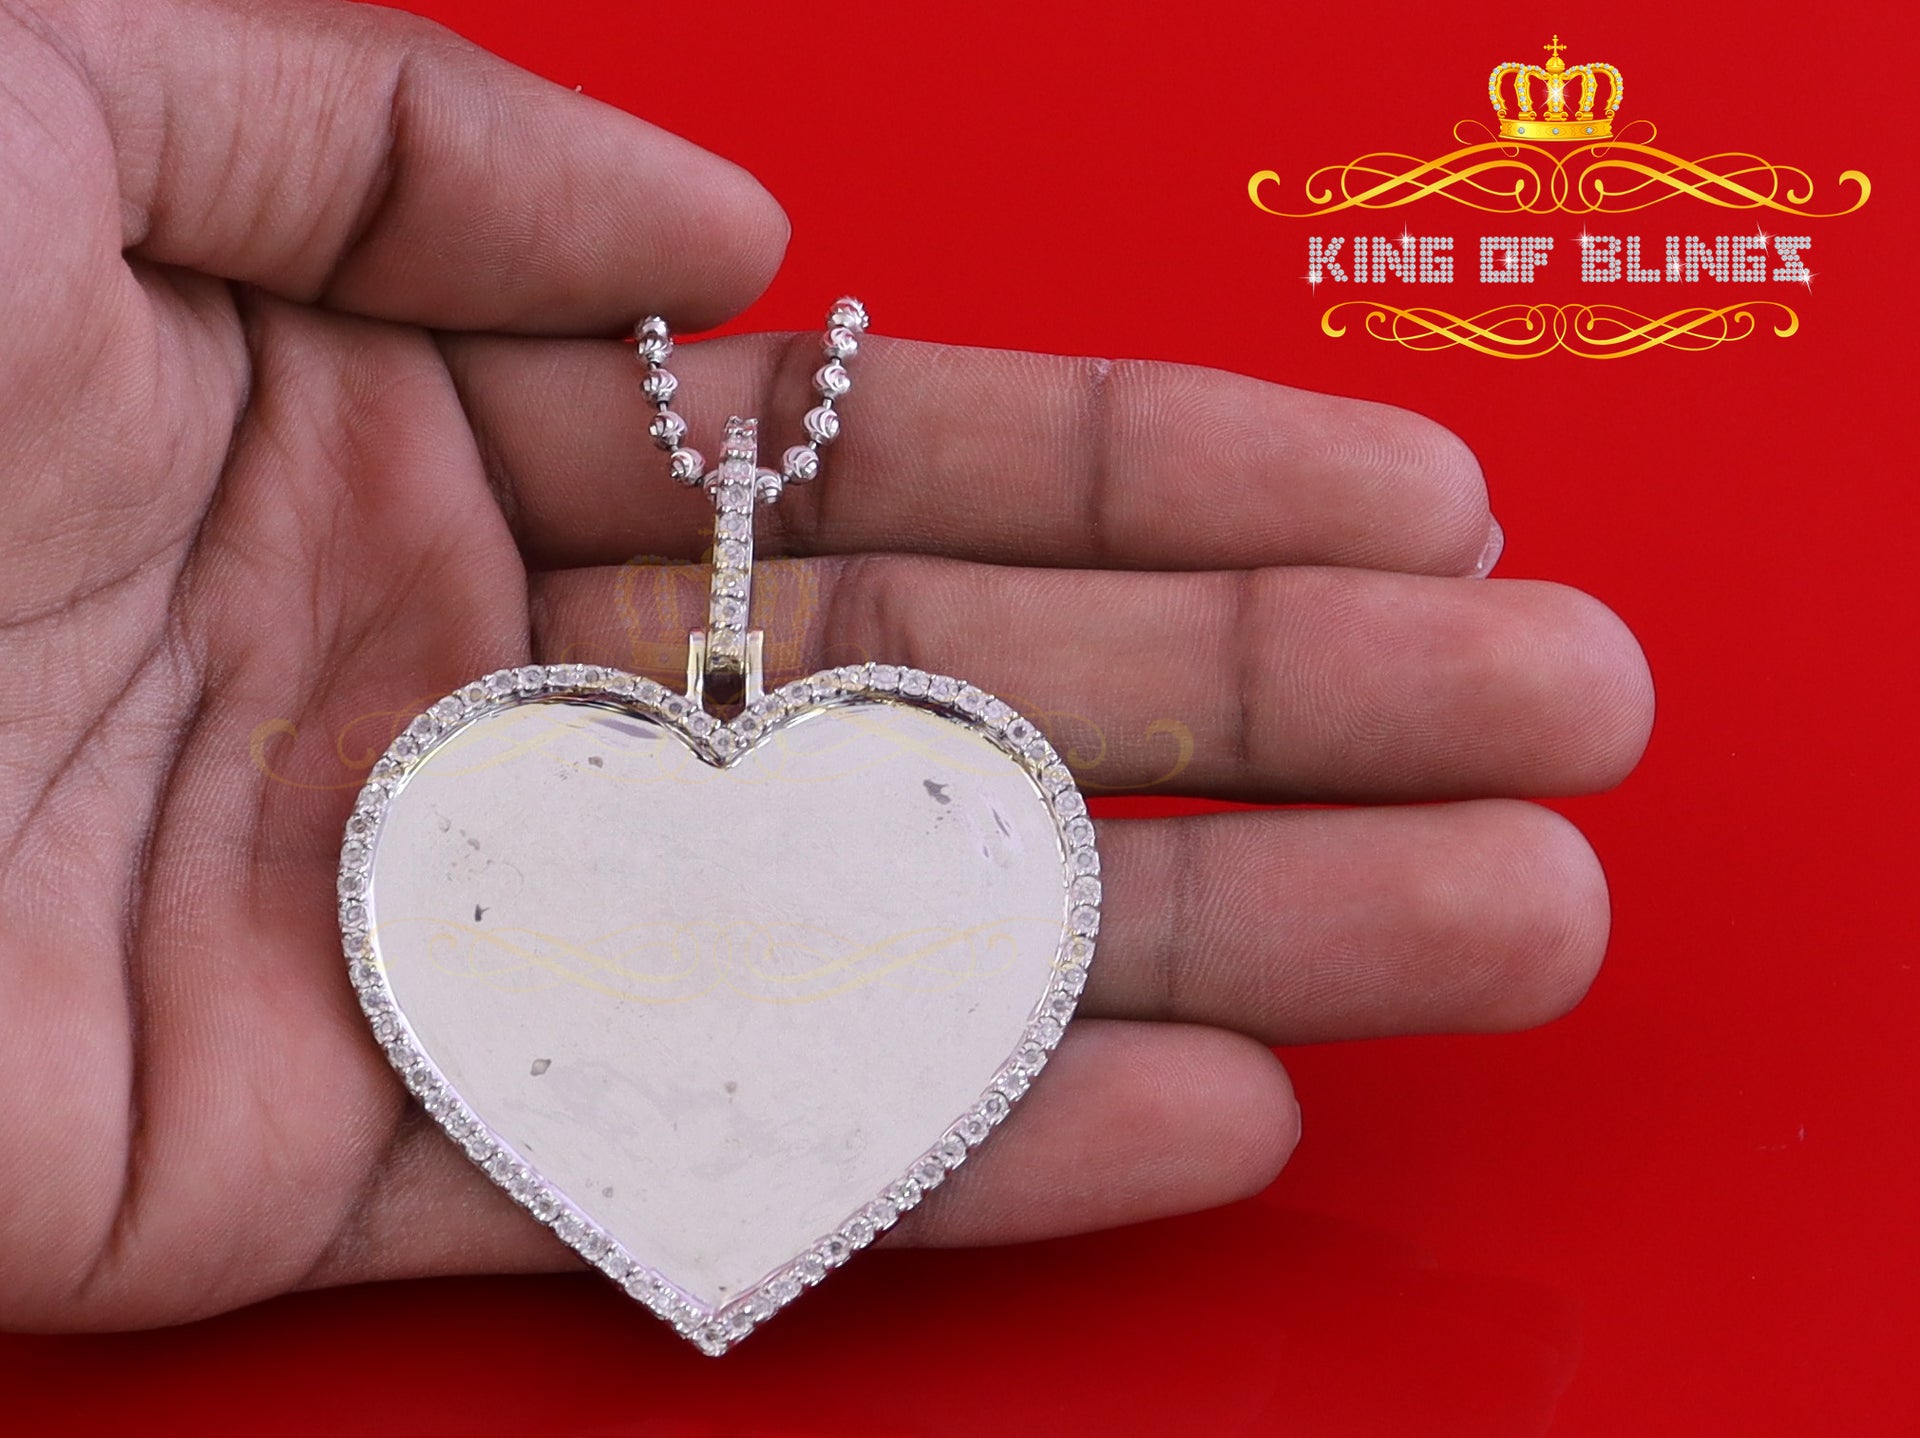 King Of Bling's KOB 0.75ct Real Diamond White 925 Sterling Silver "2" Inch Heart PICTURE Pendant KING OF BLINGS